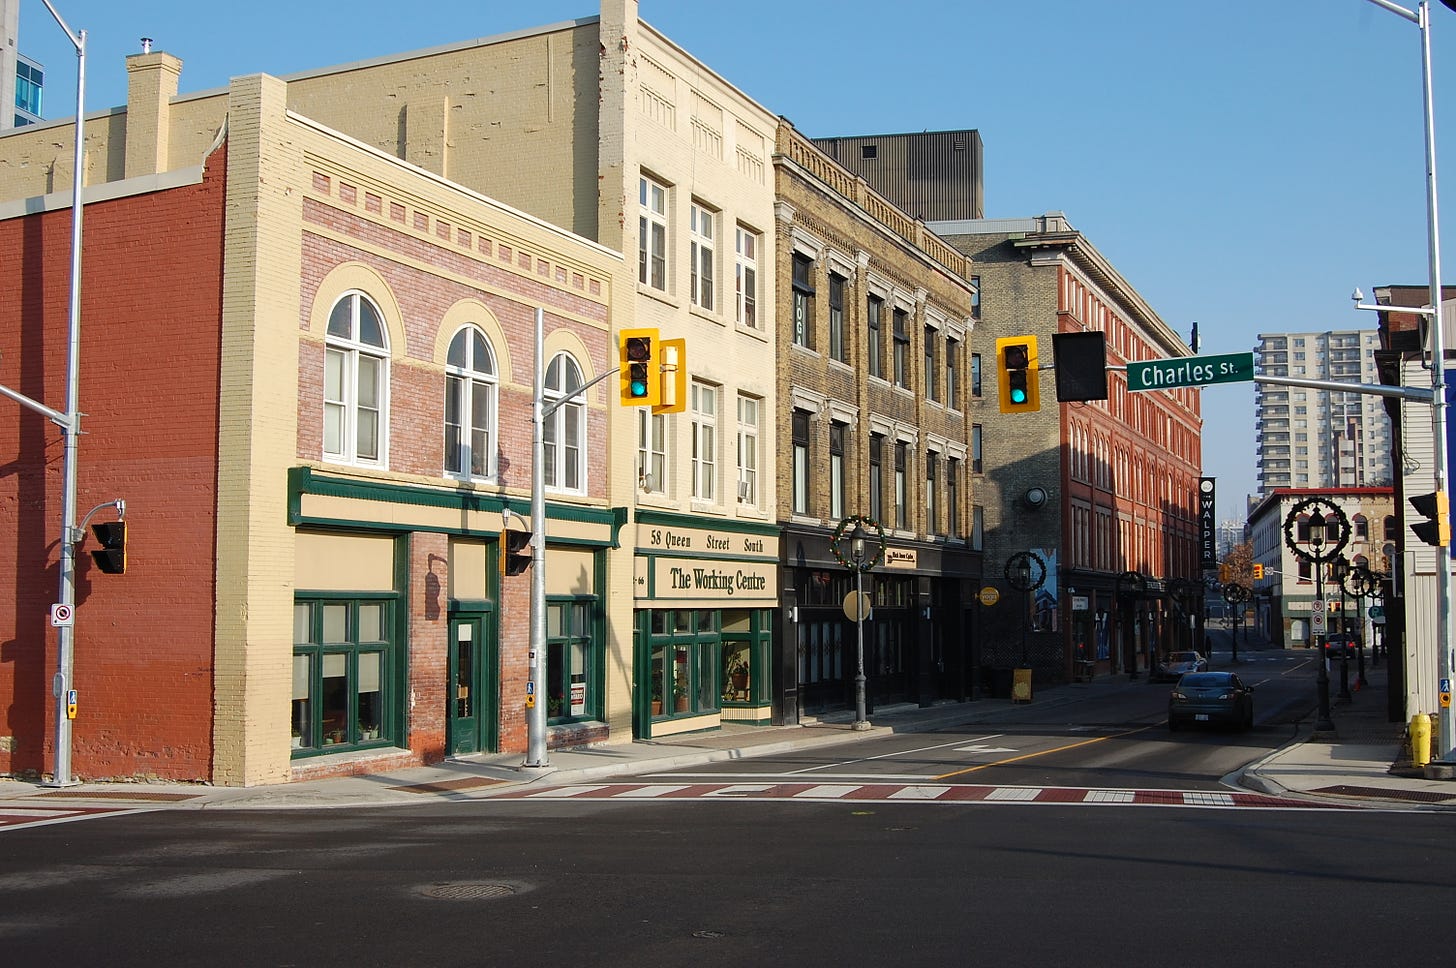 Block of buildings in downtown Kitchener with businesses, organizations, and housing represented.